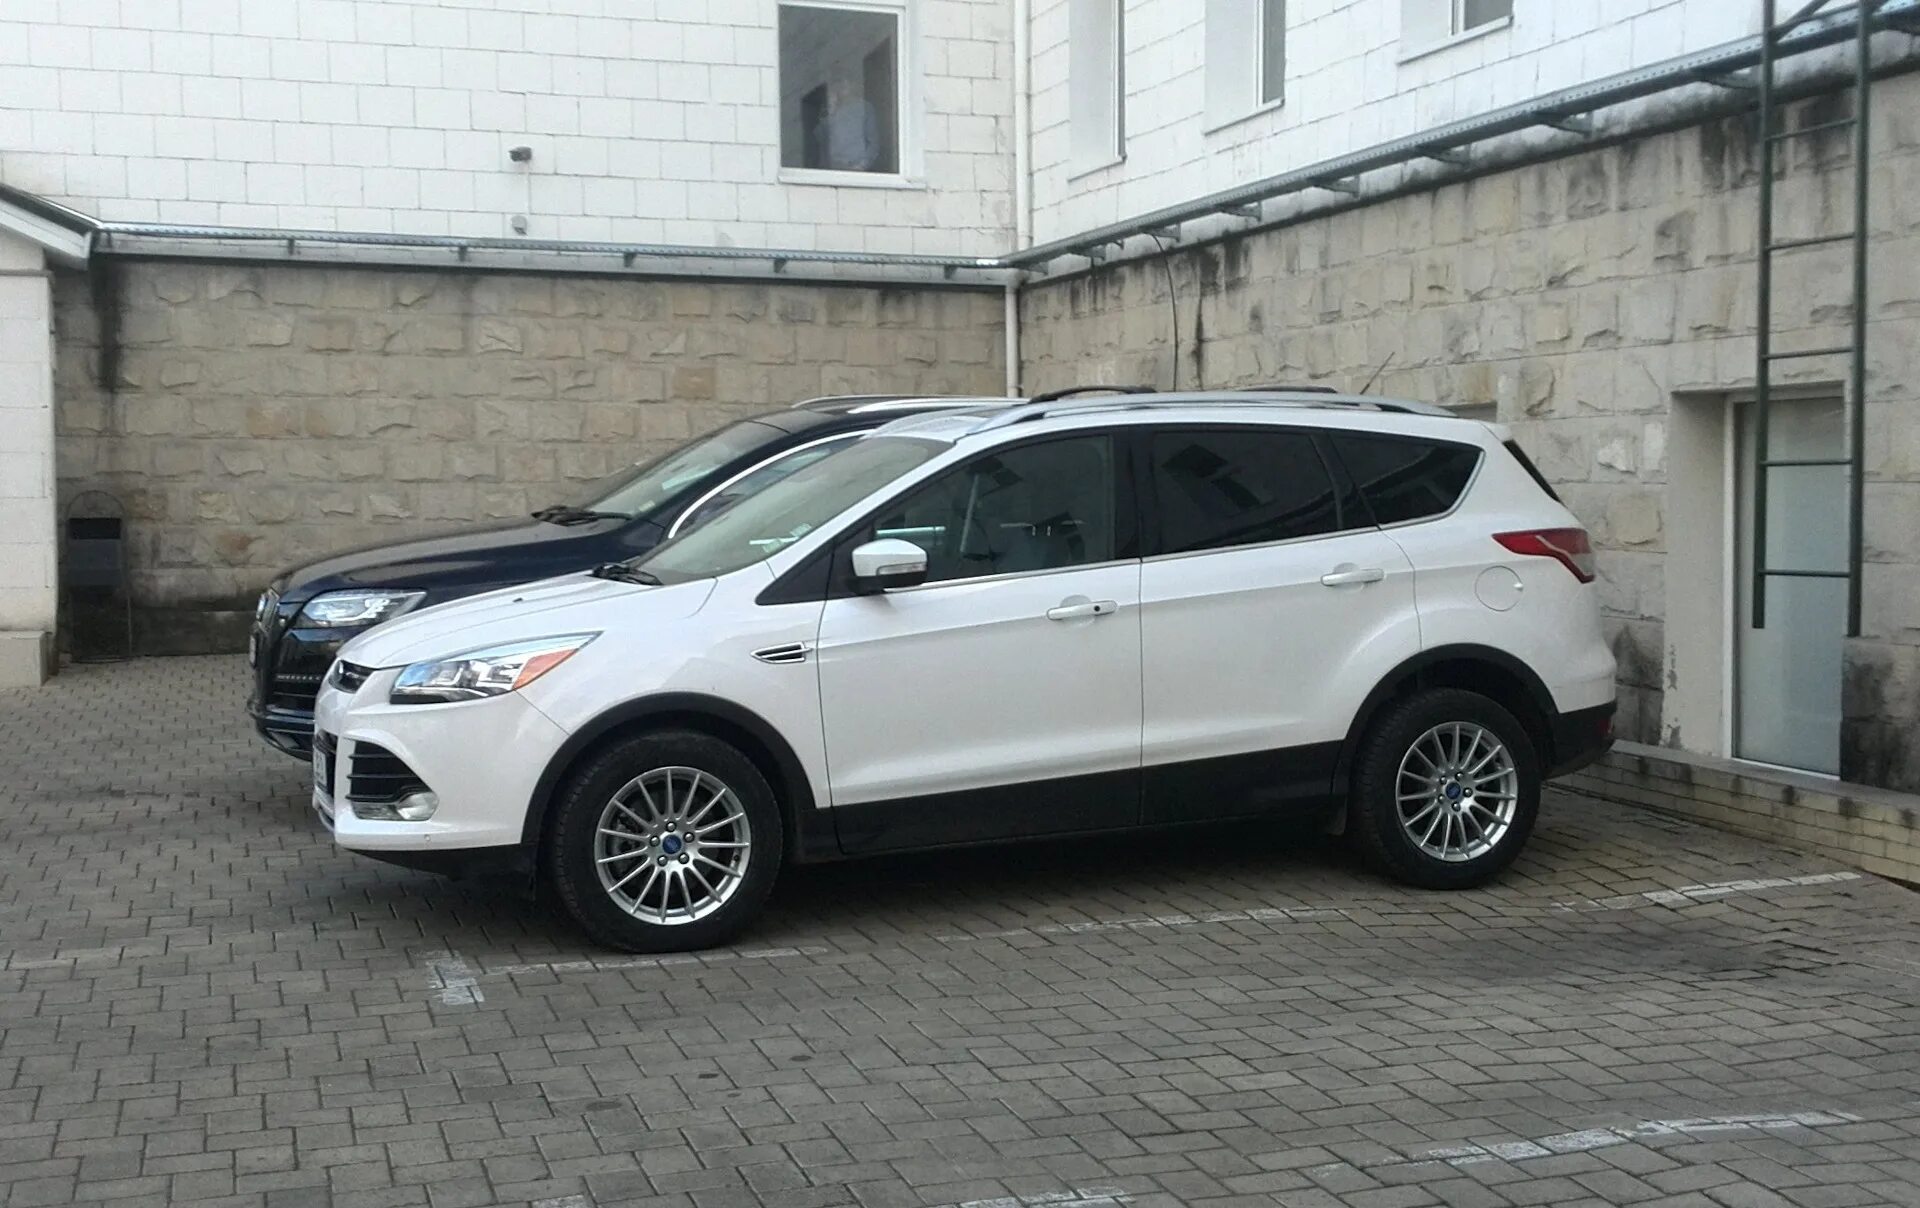 Форд куга r17. Ford Kuga r19. Ford Escape r19. Форд Куга 2 r19. Диски Форд Куга r17.